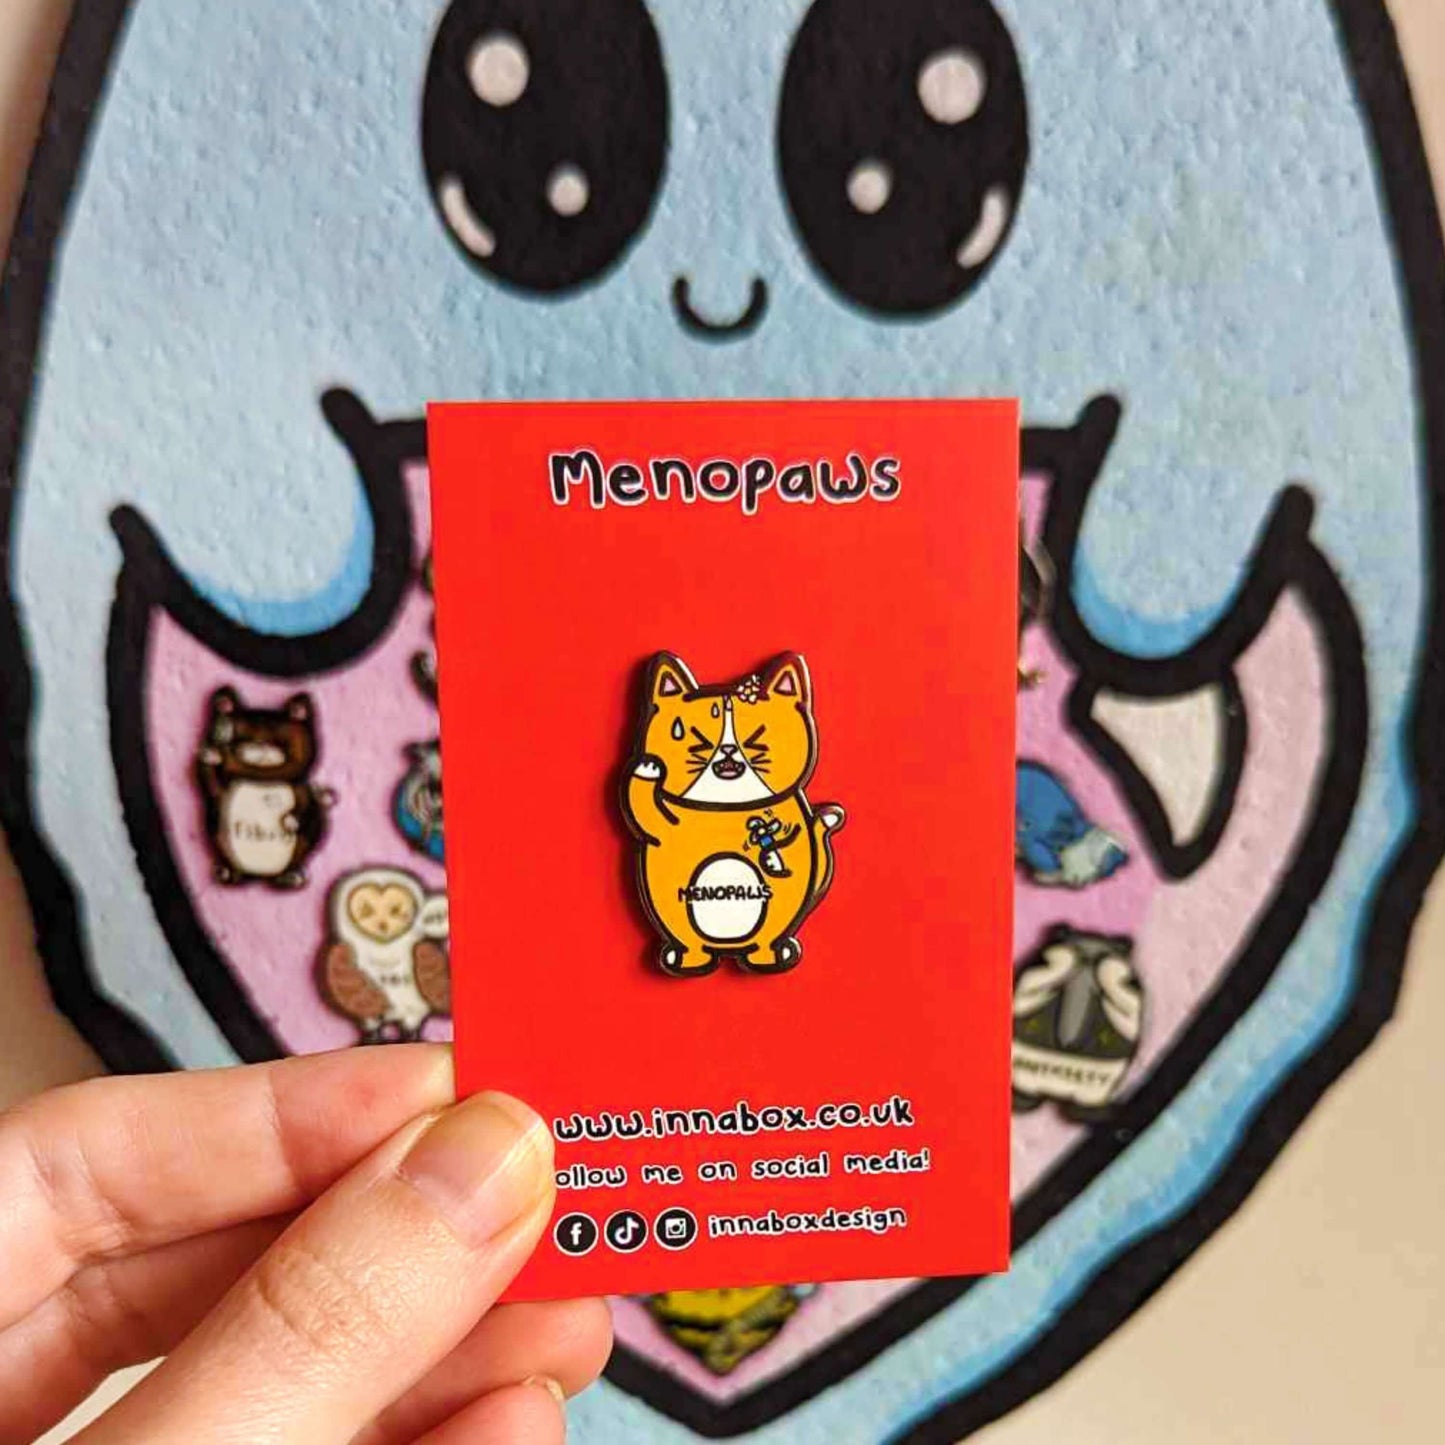 Menopaws Enamel Pin - Menopause shown on red backing card held in front of a cork board with various enamel pins on. The enamel pin is of a menopausal ginger and white cat with a daisy in it's hair. The cat is holding an electric fan and is looking hot with sweat droplets on it's face. Hand drawn design made to raise awareness for menopause